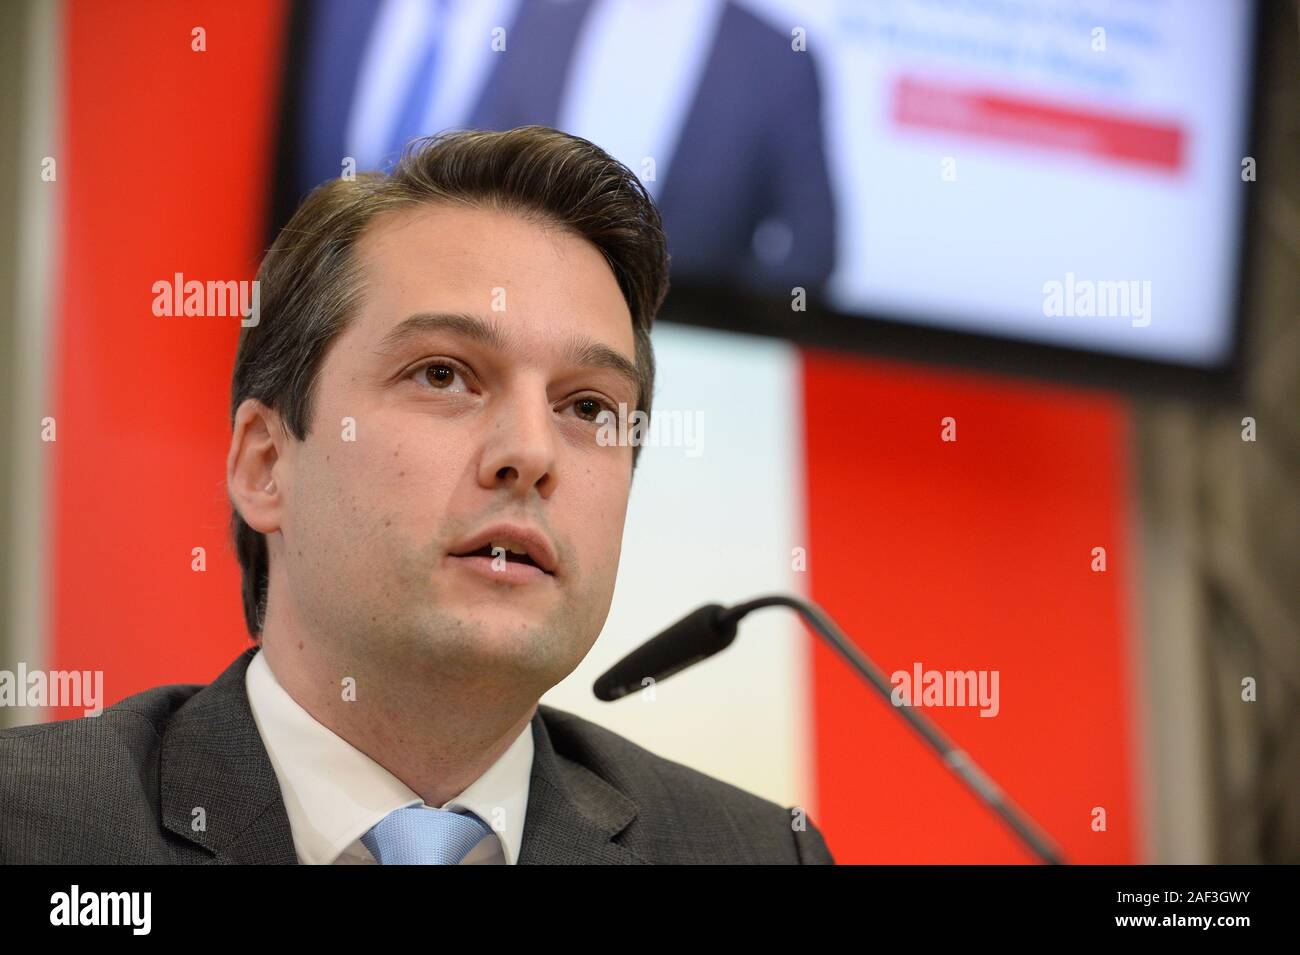 Vienna, 12th December, 2019.  The Vienna Freedom Party Austria (FPÖ) Dominik Nepp gives a press conference about the split-off of three FPÖ mandataries and the re-founding of the 'Alliance for Austria (ADÖ)'. Credit: Franz Perc / Alamy Live News Stock Photo